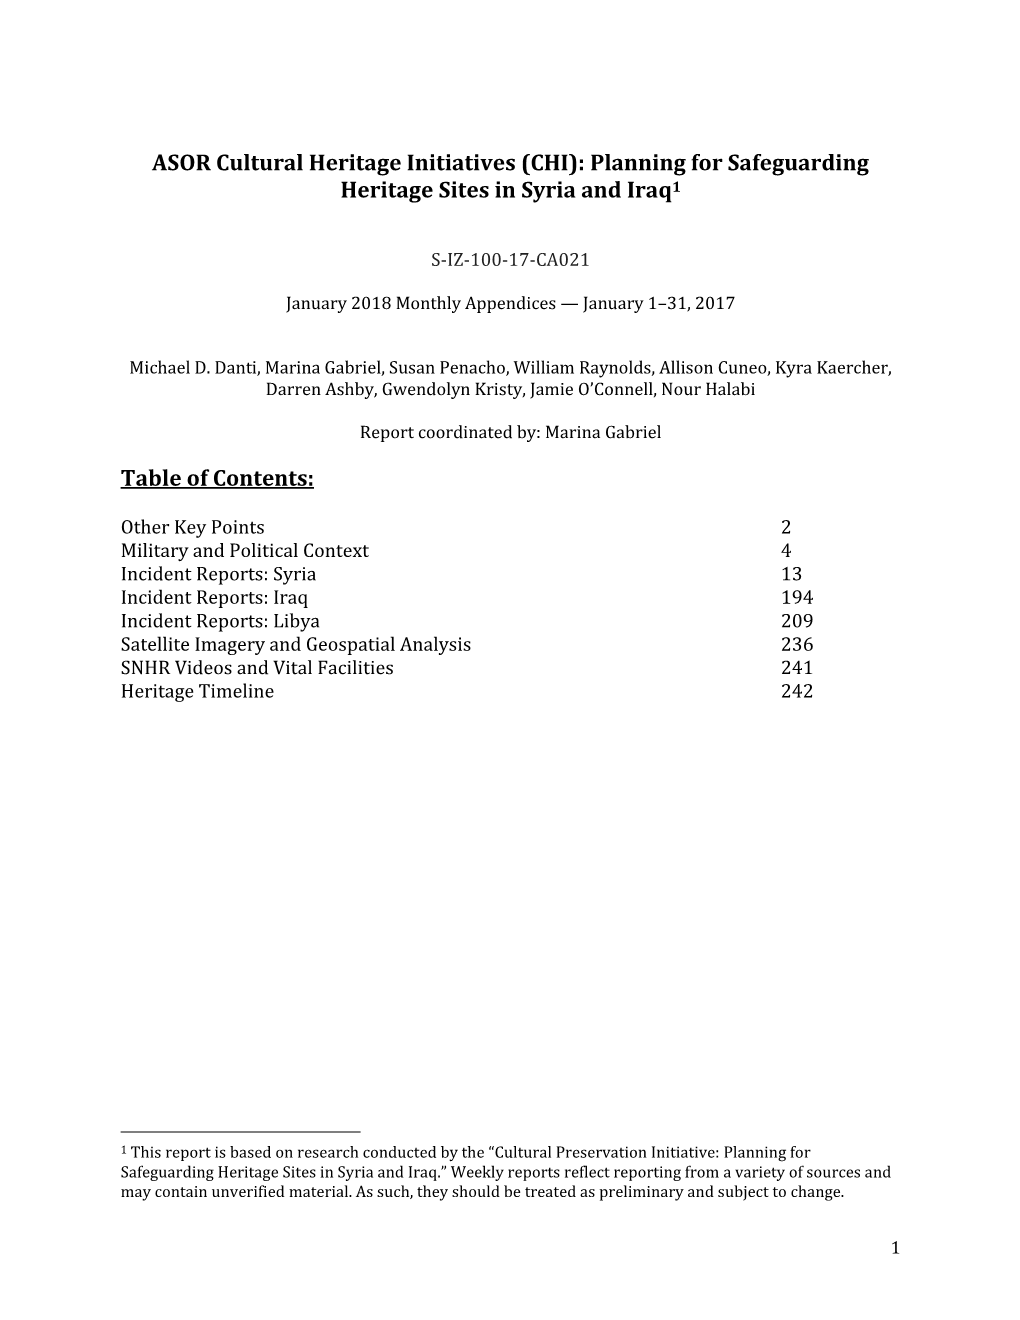 (CHI): Planning for Safeguarding Heritage Sites in Syria and Iraq1